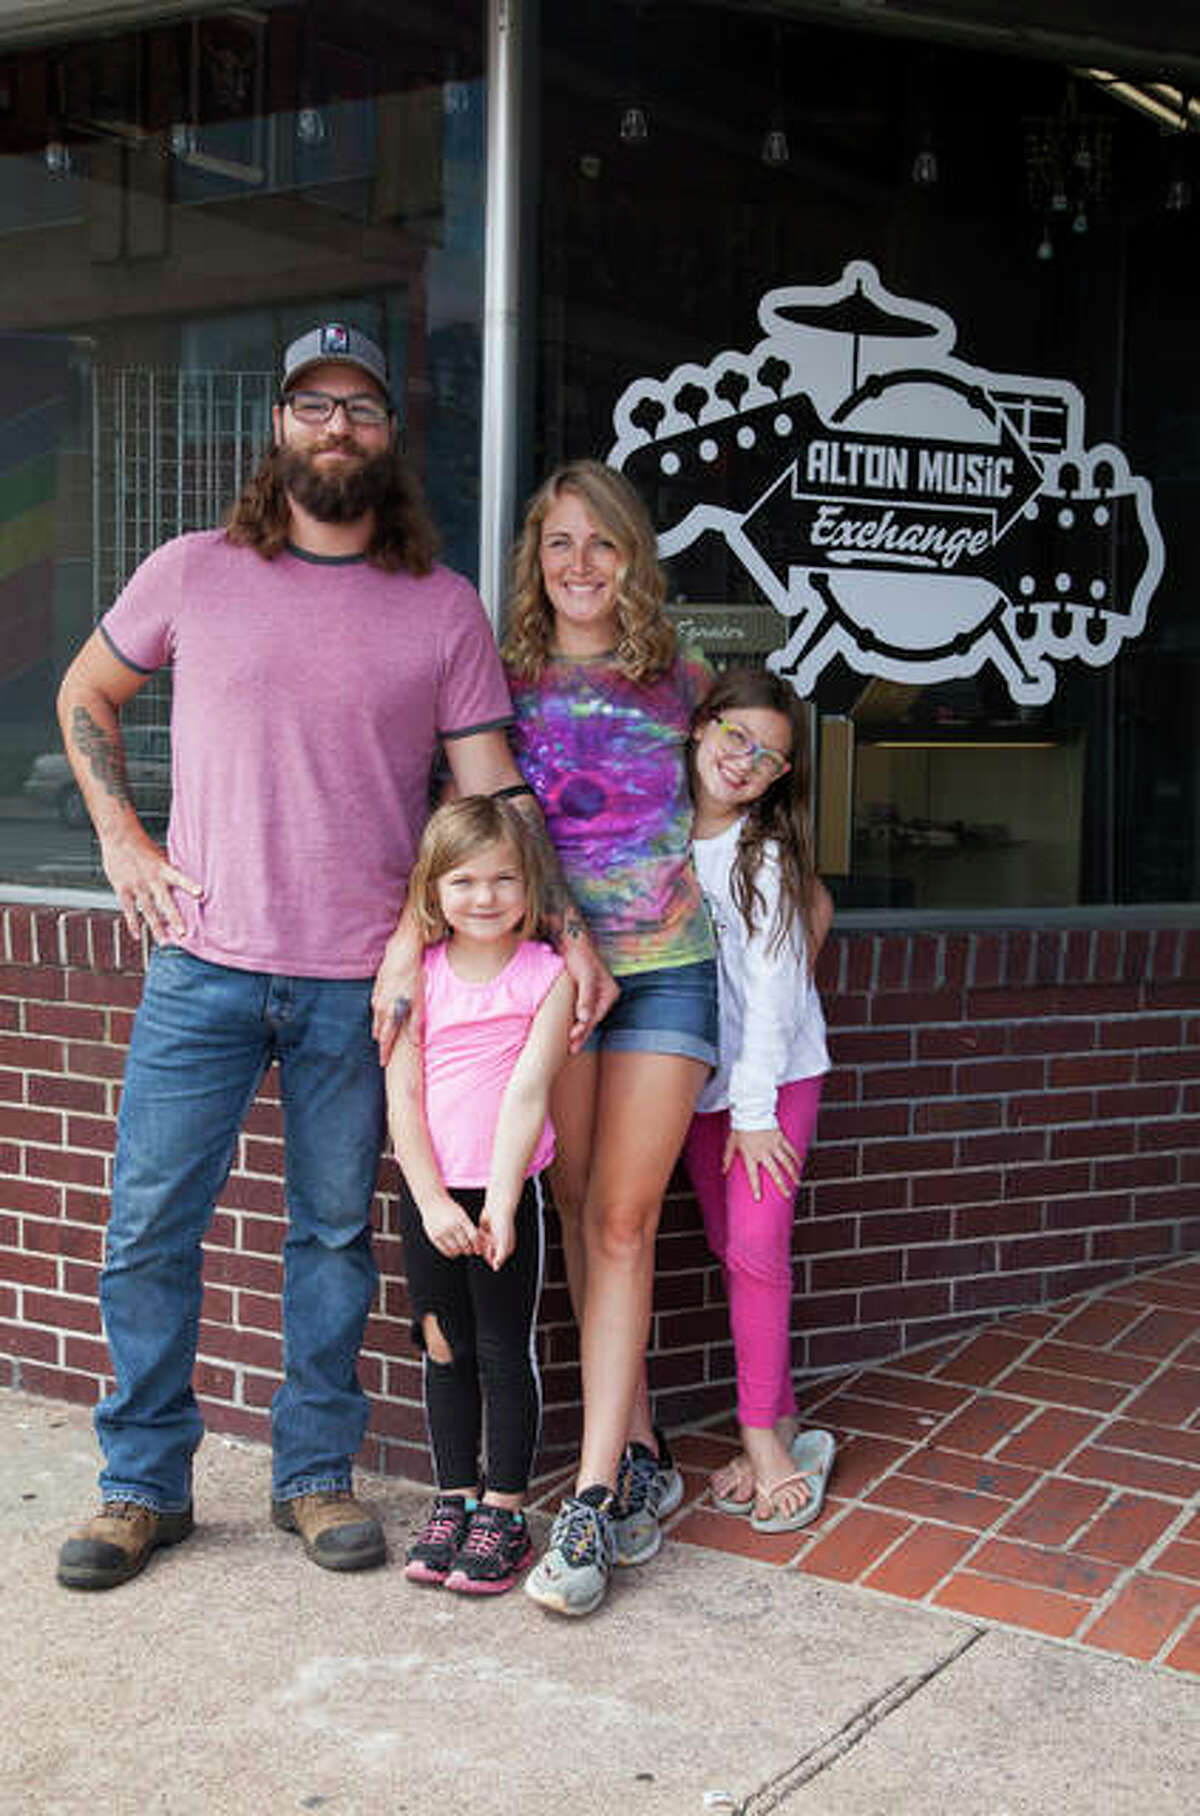 Jared and Jenny Unfried with their two daughters in front of their newly opened music store, Alton Music Exchange, 556 E. Broadway in Downtown Alton. By encouraging local musicians to bring in guitars, amps and whatever else they might have for trade or sale, the couple hopes to build a hub for local musicians and strengthen the local music community.